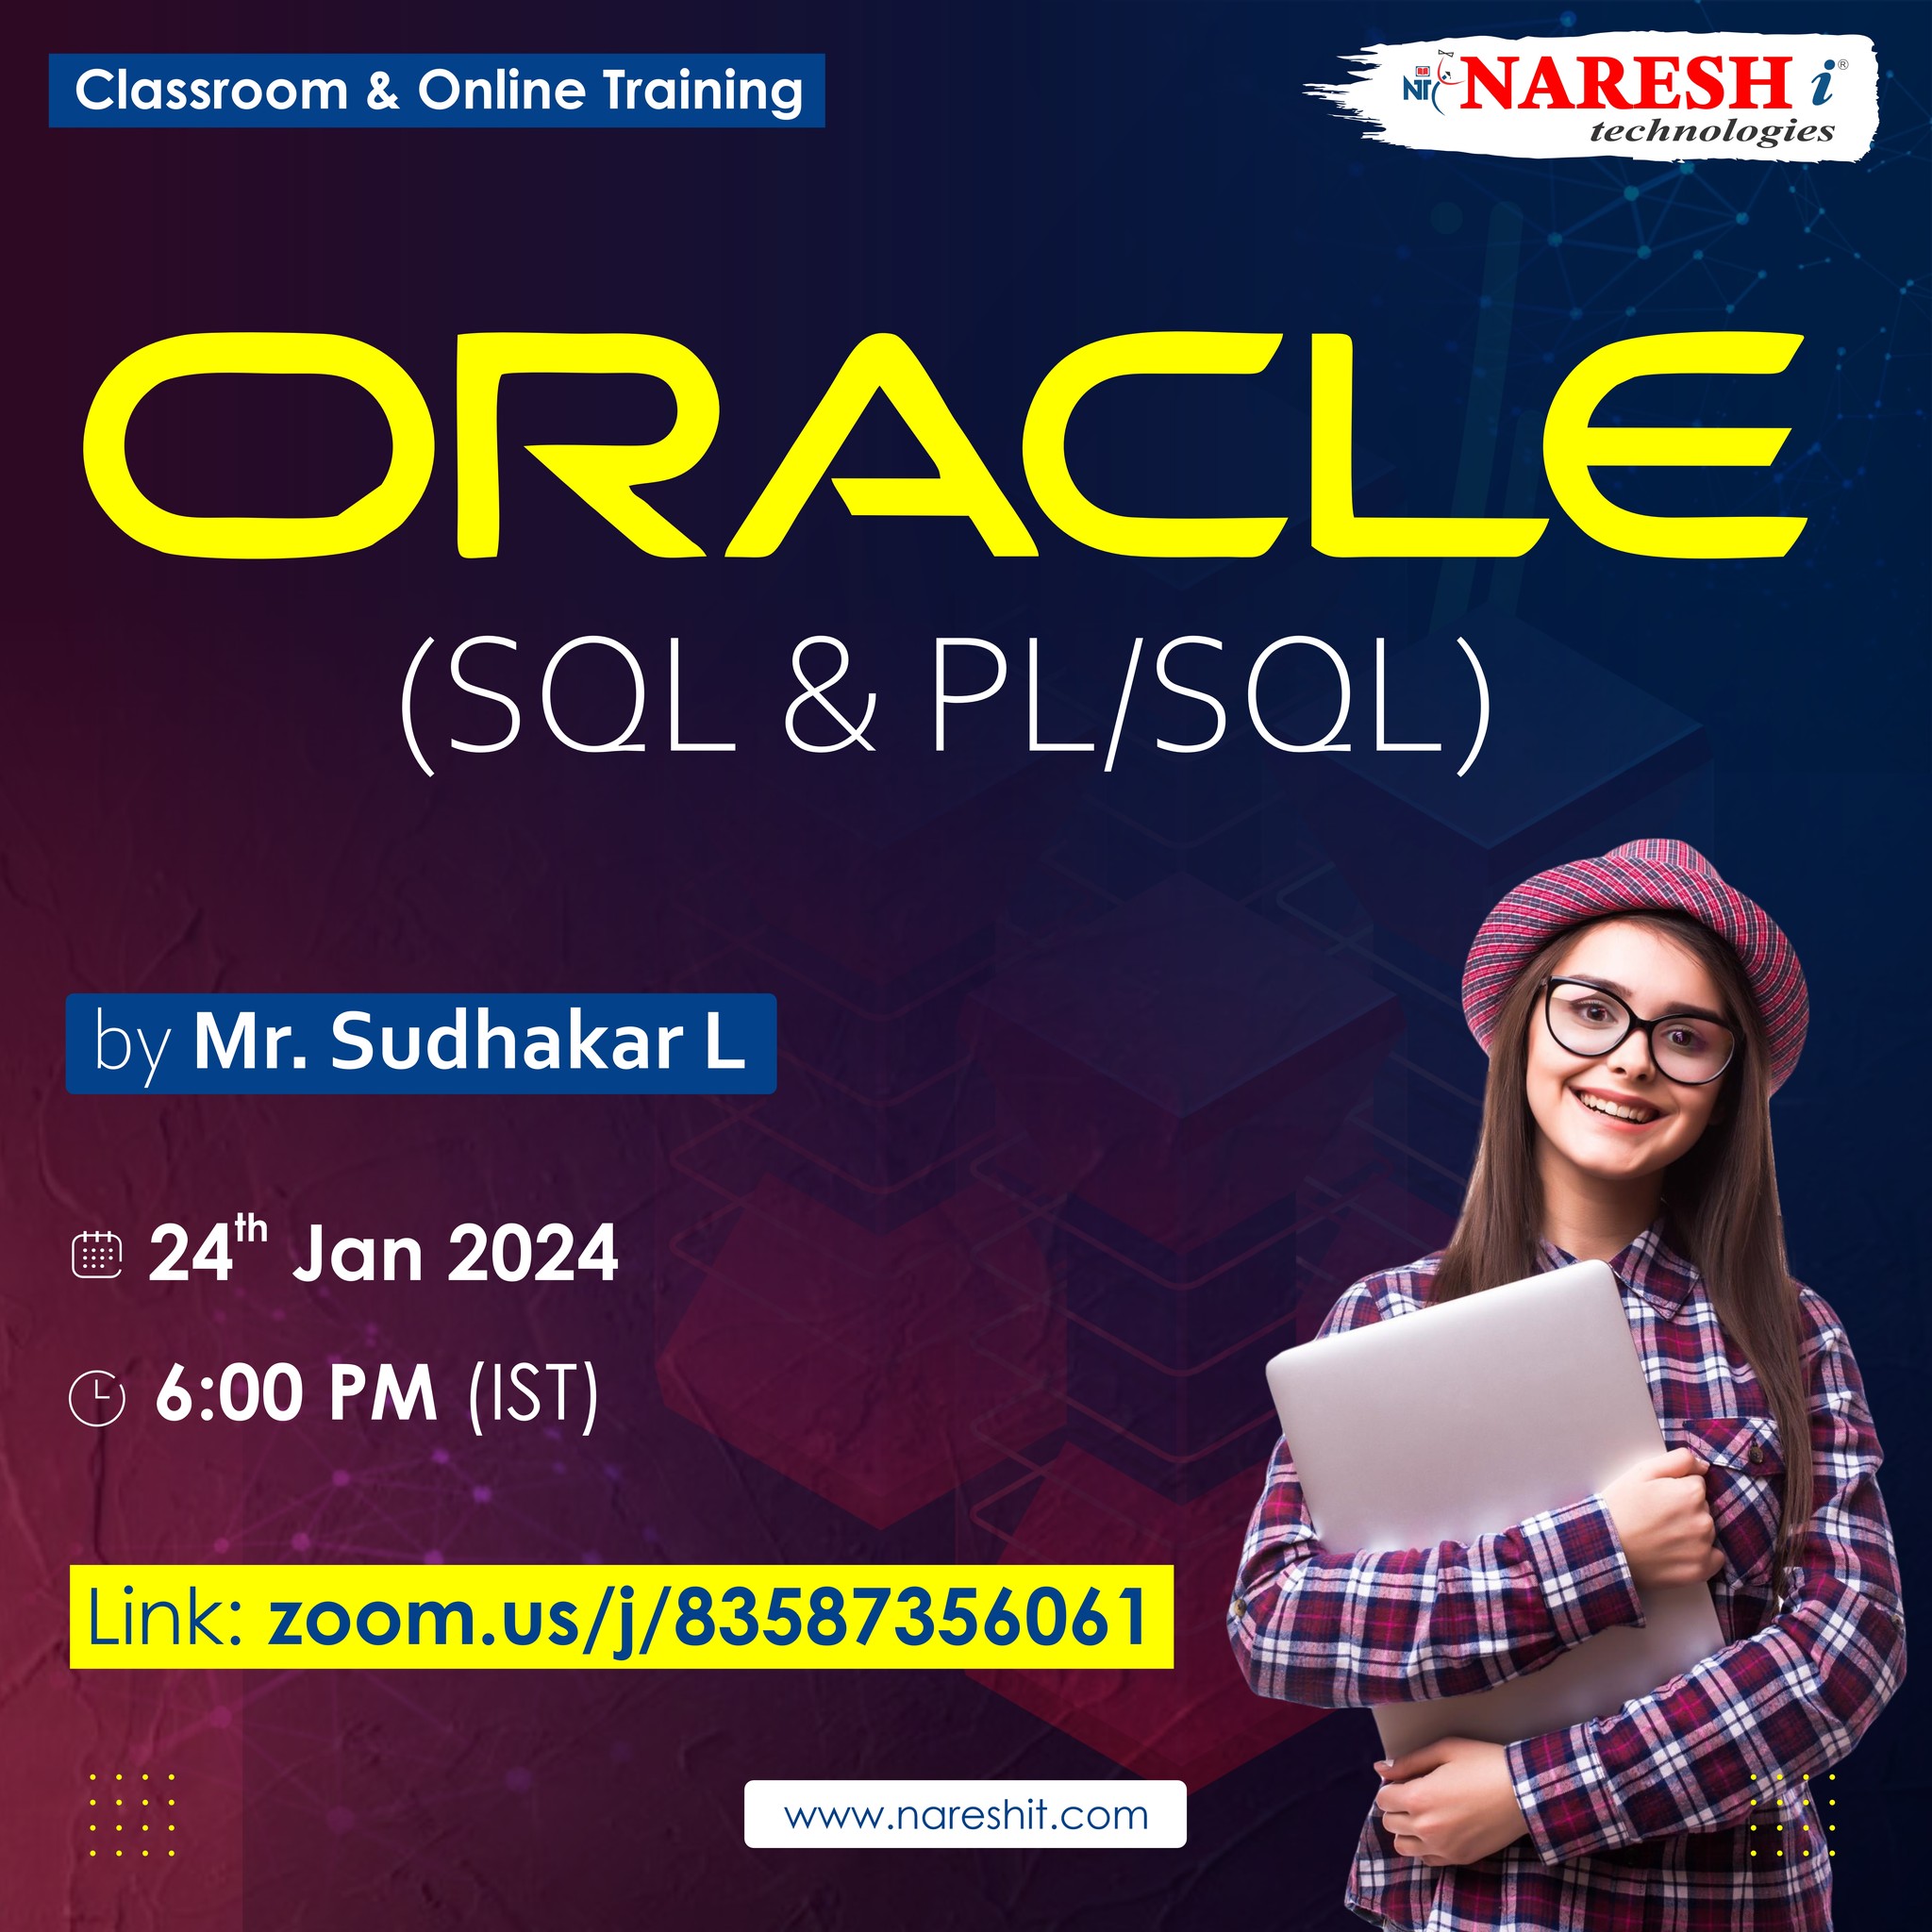 ORACLE ONLINE TRAINING IN NARESHIT-, Online Event